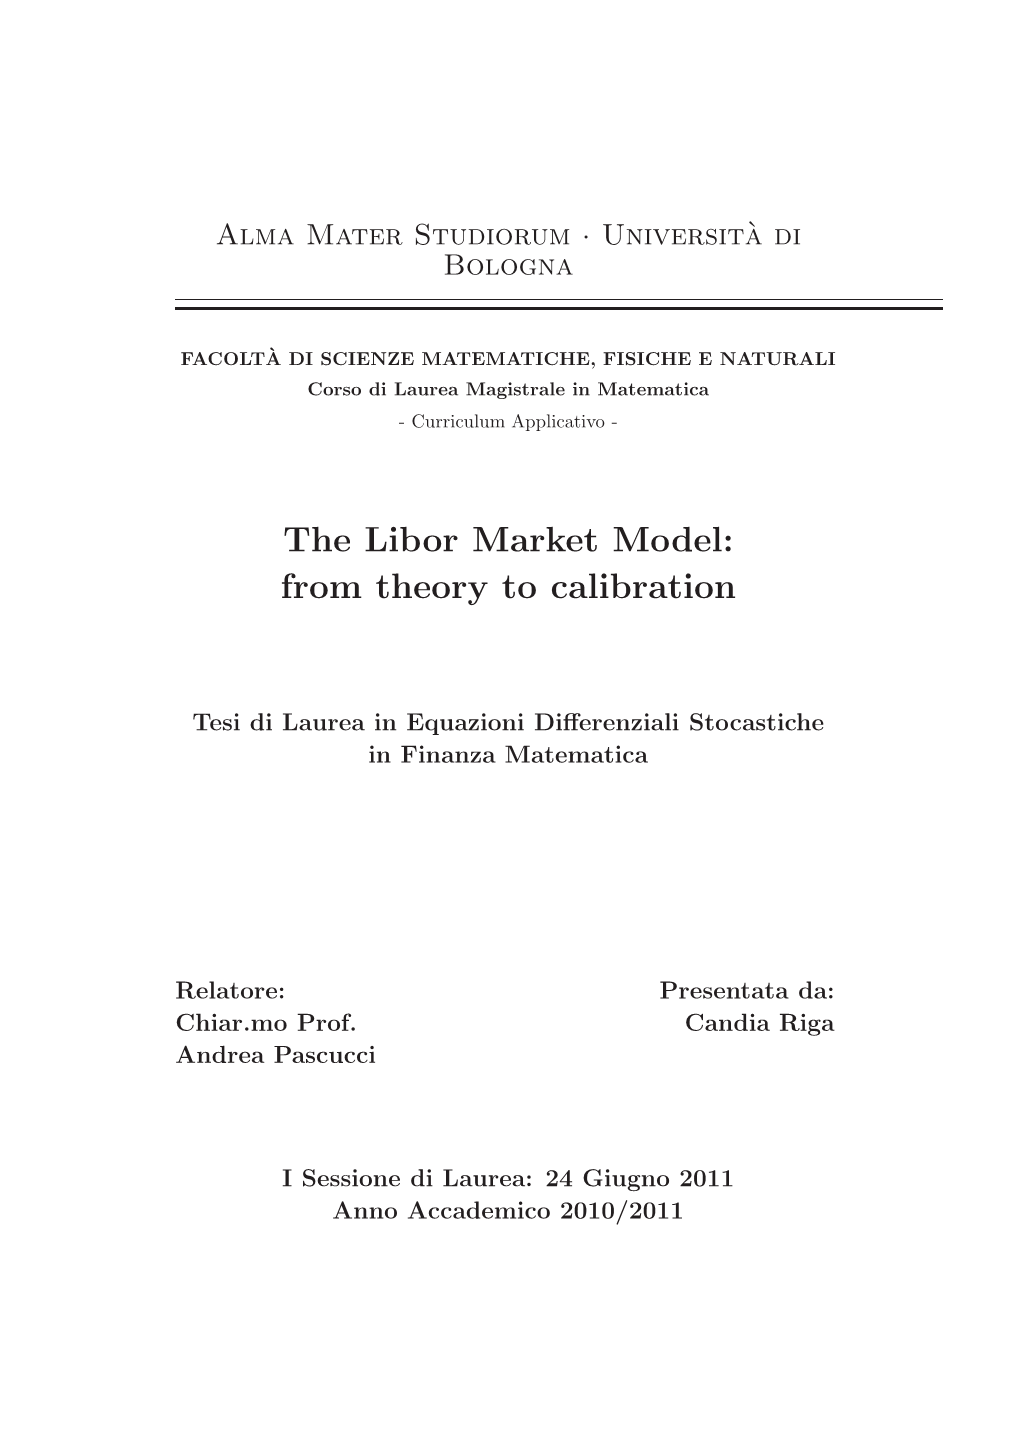 The Libor Market Model: from Theory to Calibration